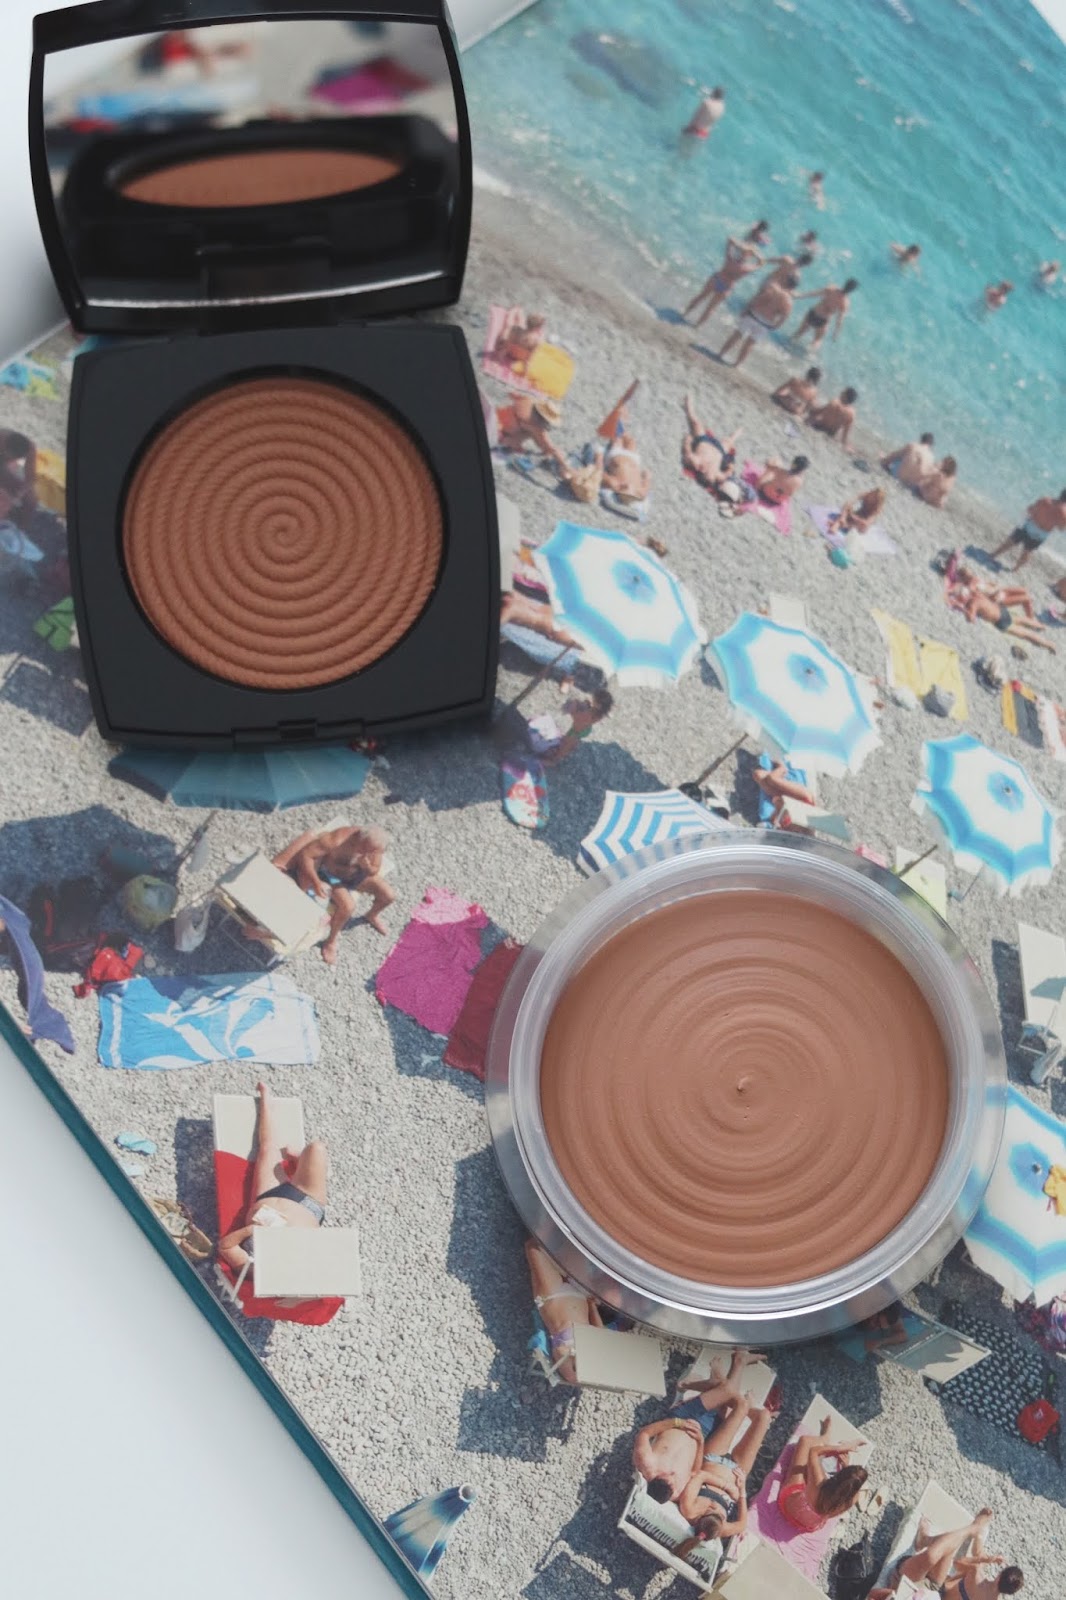 CHANEL Les Beiges Summer of Glow collection: A quick review